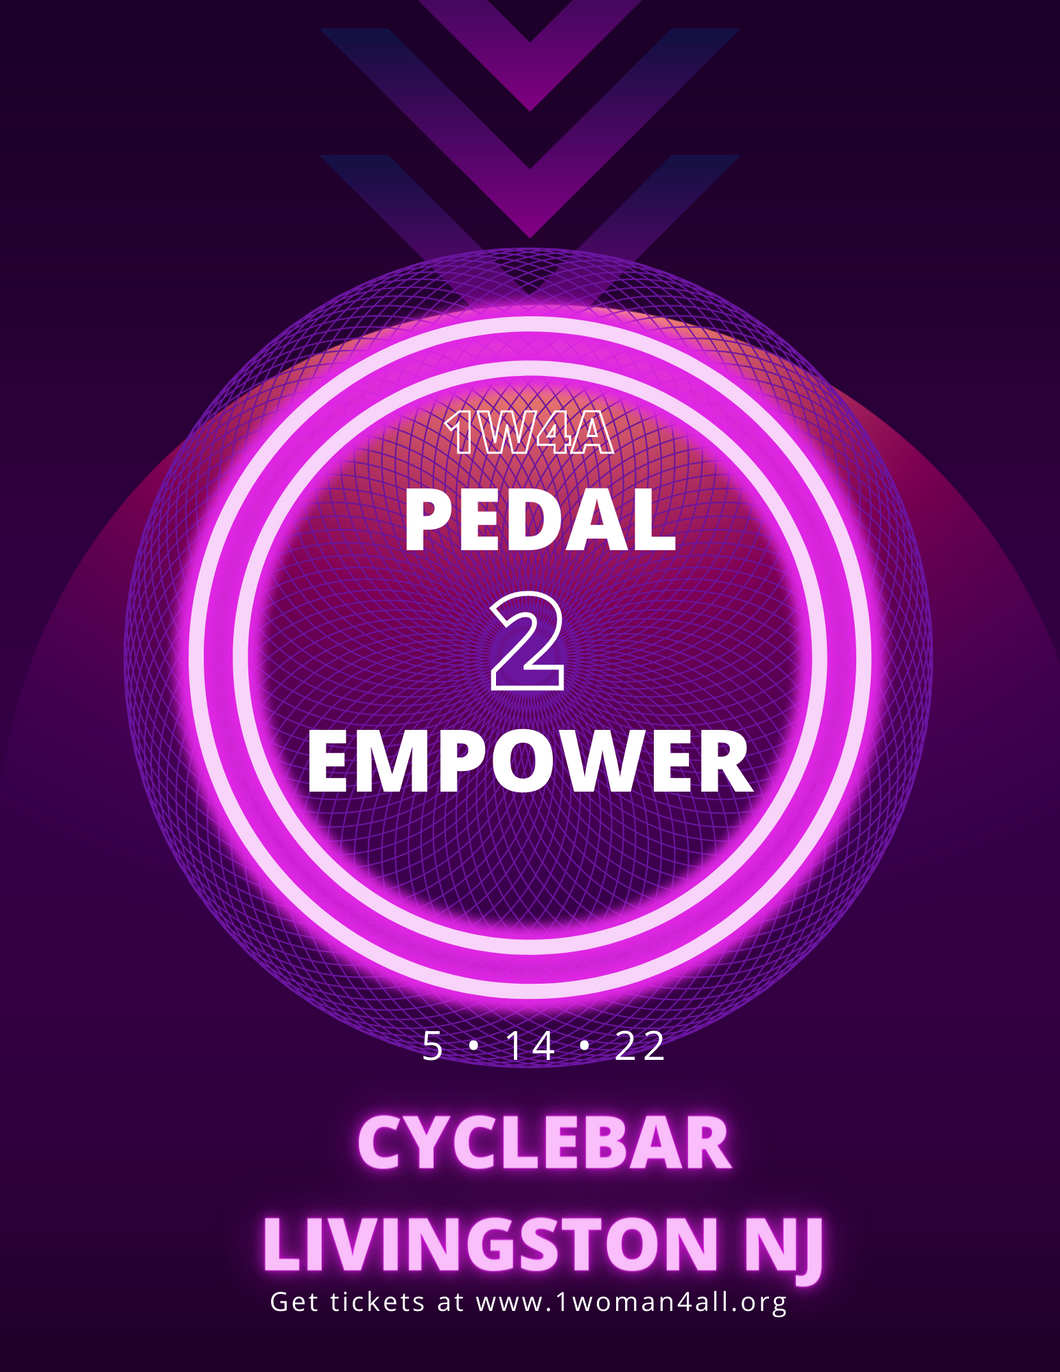 Pedal 2 Empower